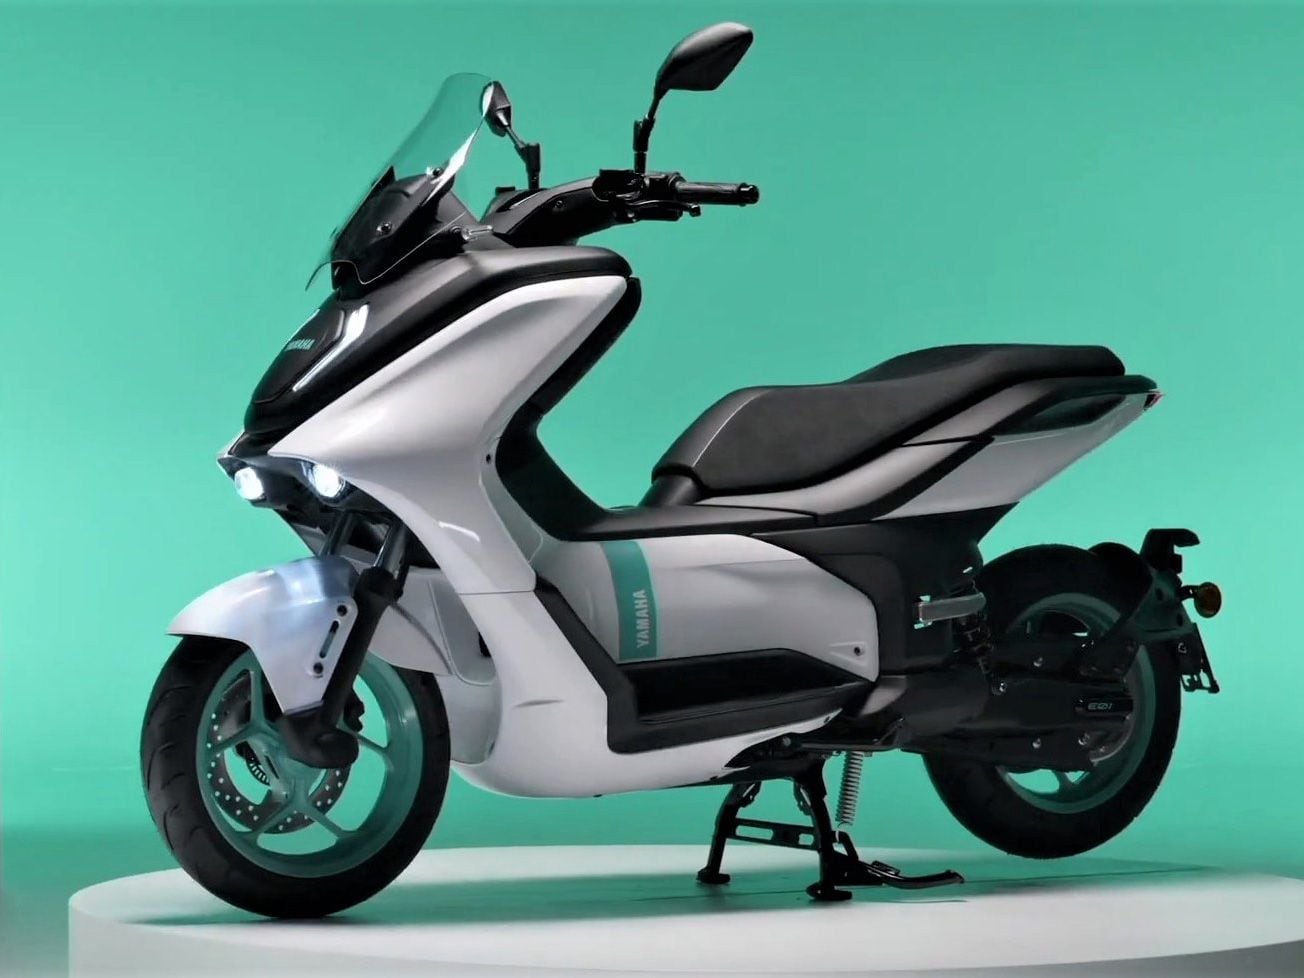 Yamaha’s latest electric strategy will consist of small scooters, like this E01, aimed at urban riders in European cities.